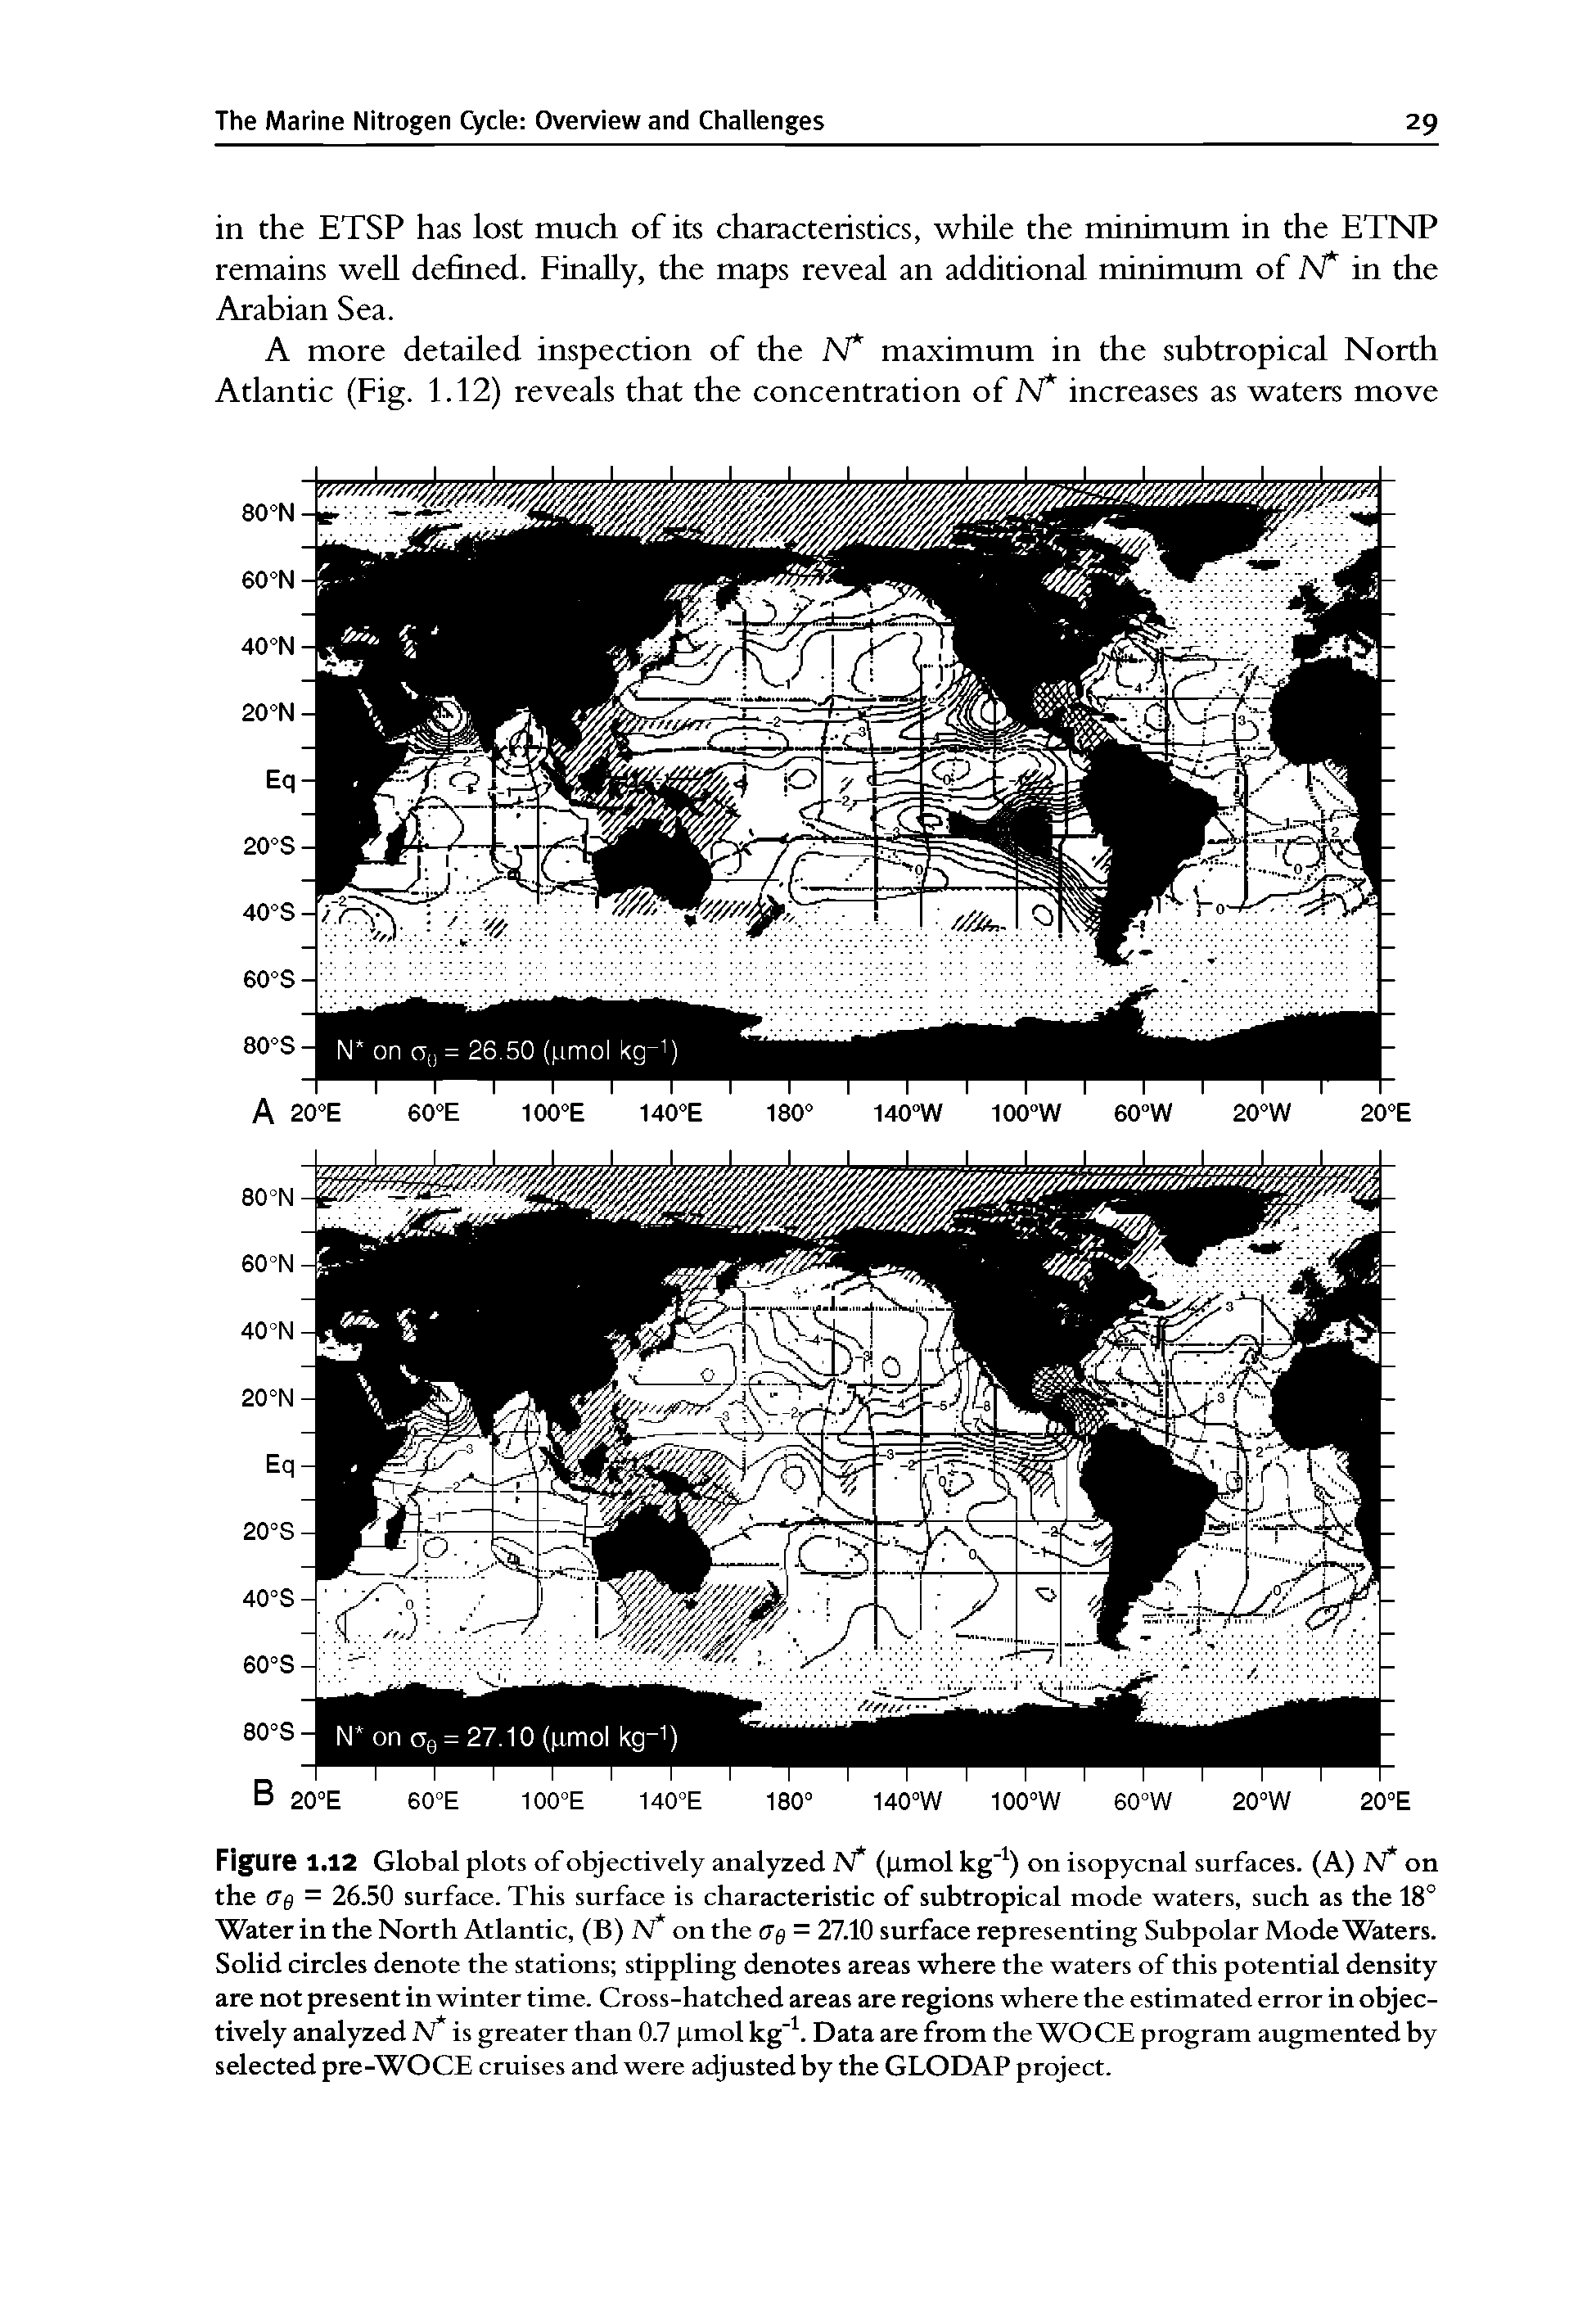 Figure 1.12 Global plots of objectively analyzed N (pmol kg" ) on isopycnal surfaces. (A) N on the as = 26.50 surface. This surface is characteristic of subtropical mode waters, such as the 18° Water in the North Atlantic, (B) N on the as = 27.10 surface representing Subpolar Mode Waters. Solid circles denote the stations stippling denotes areas where the waters of this potential density are not present in winter time. Cross-hatched areas are regions where the estimated error in objectively analyzed JV is greater than 0.7 pmol kg". Data are from the WOCE program augmented by selected pre-WOCE cruises and were adjusted by the GLODAP project.